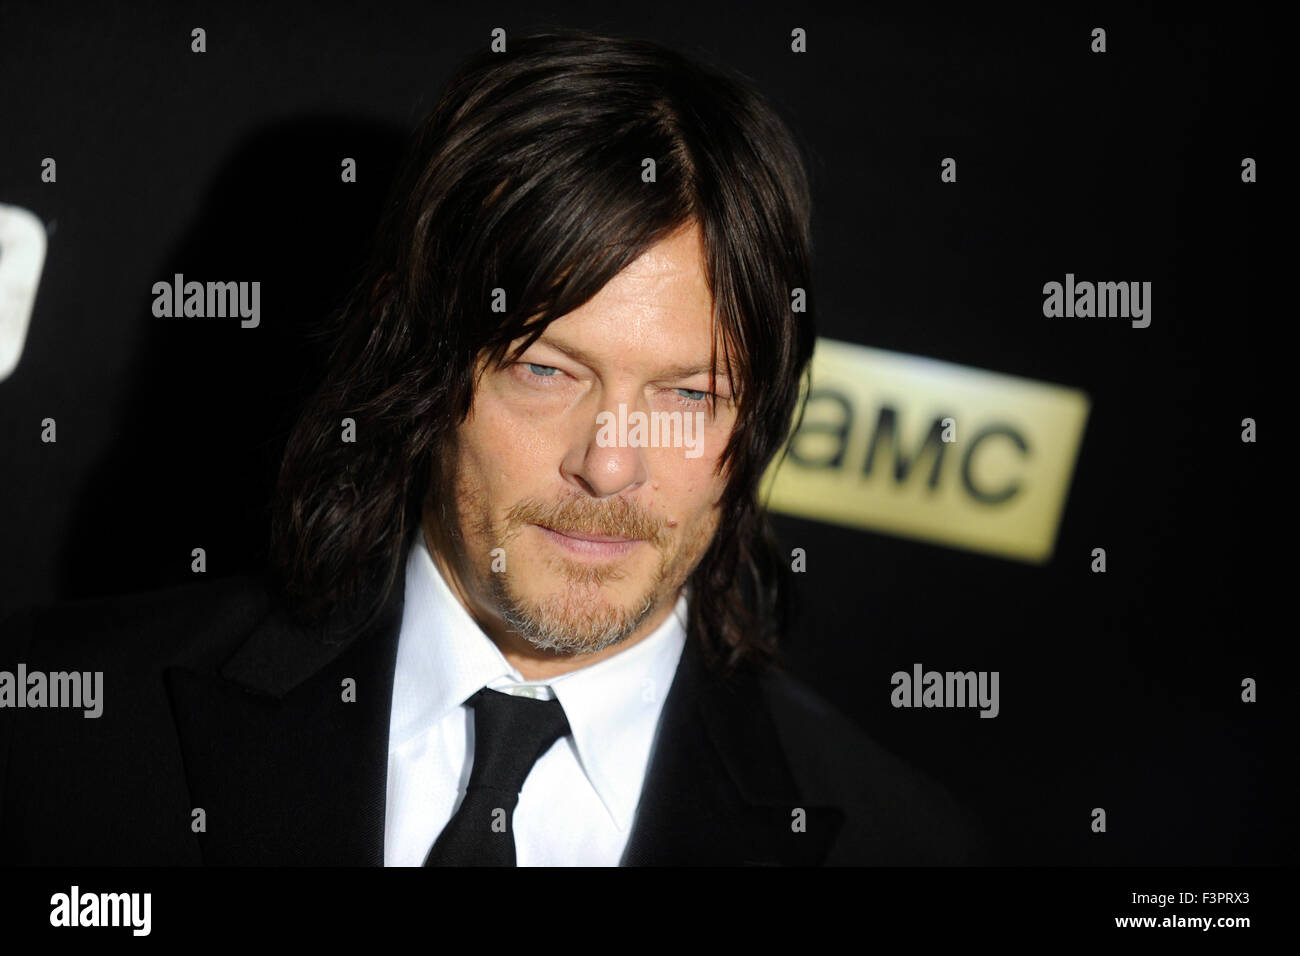 New York City. 9th Oct, 2015. Norman Reedus attends AMC's 'The Walking Dead' Season 6 Fan Premiere Event 2015 at Madison Square Garden on October 9, 2015 in New York City. © dpa/Alamy Live News Stock Photo